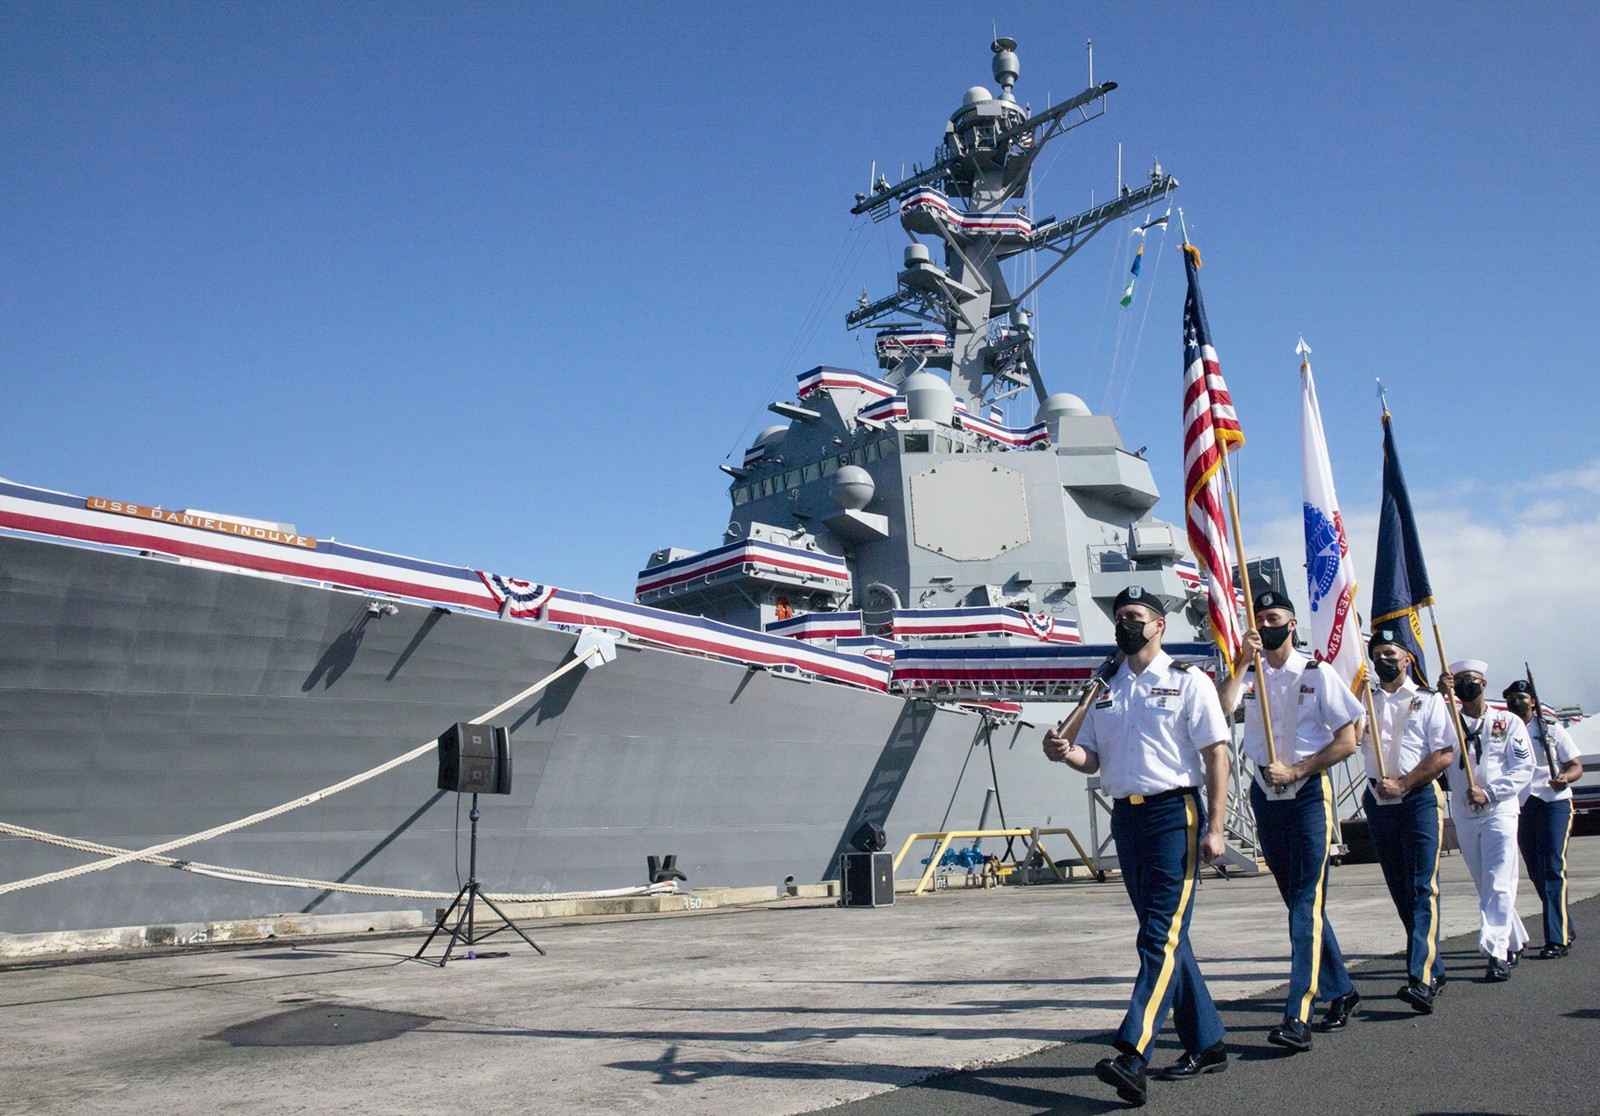 ddg-118 uss daniel inouye arleigh burke class guided missile destroyer us navy commissioning ceremony joint base pearl harbor hickam hawaii 31